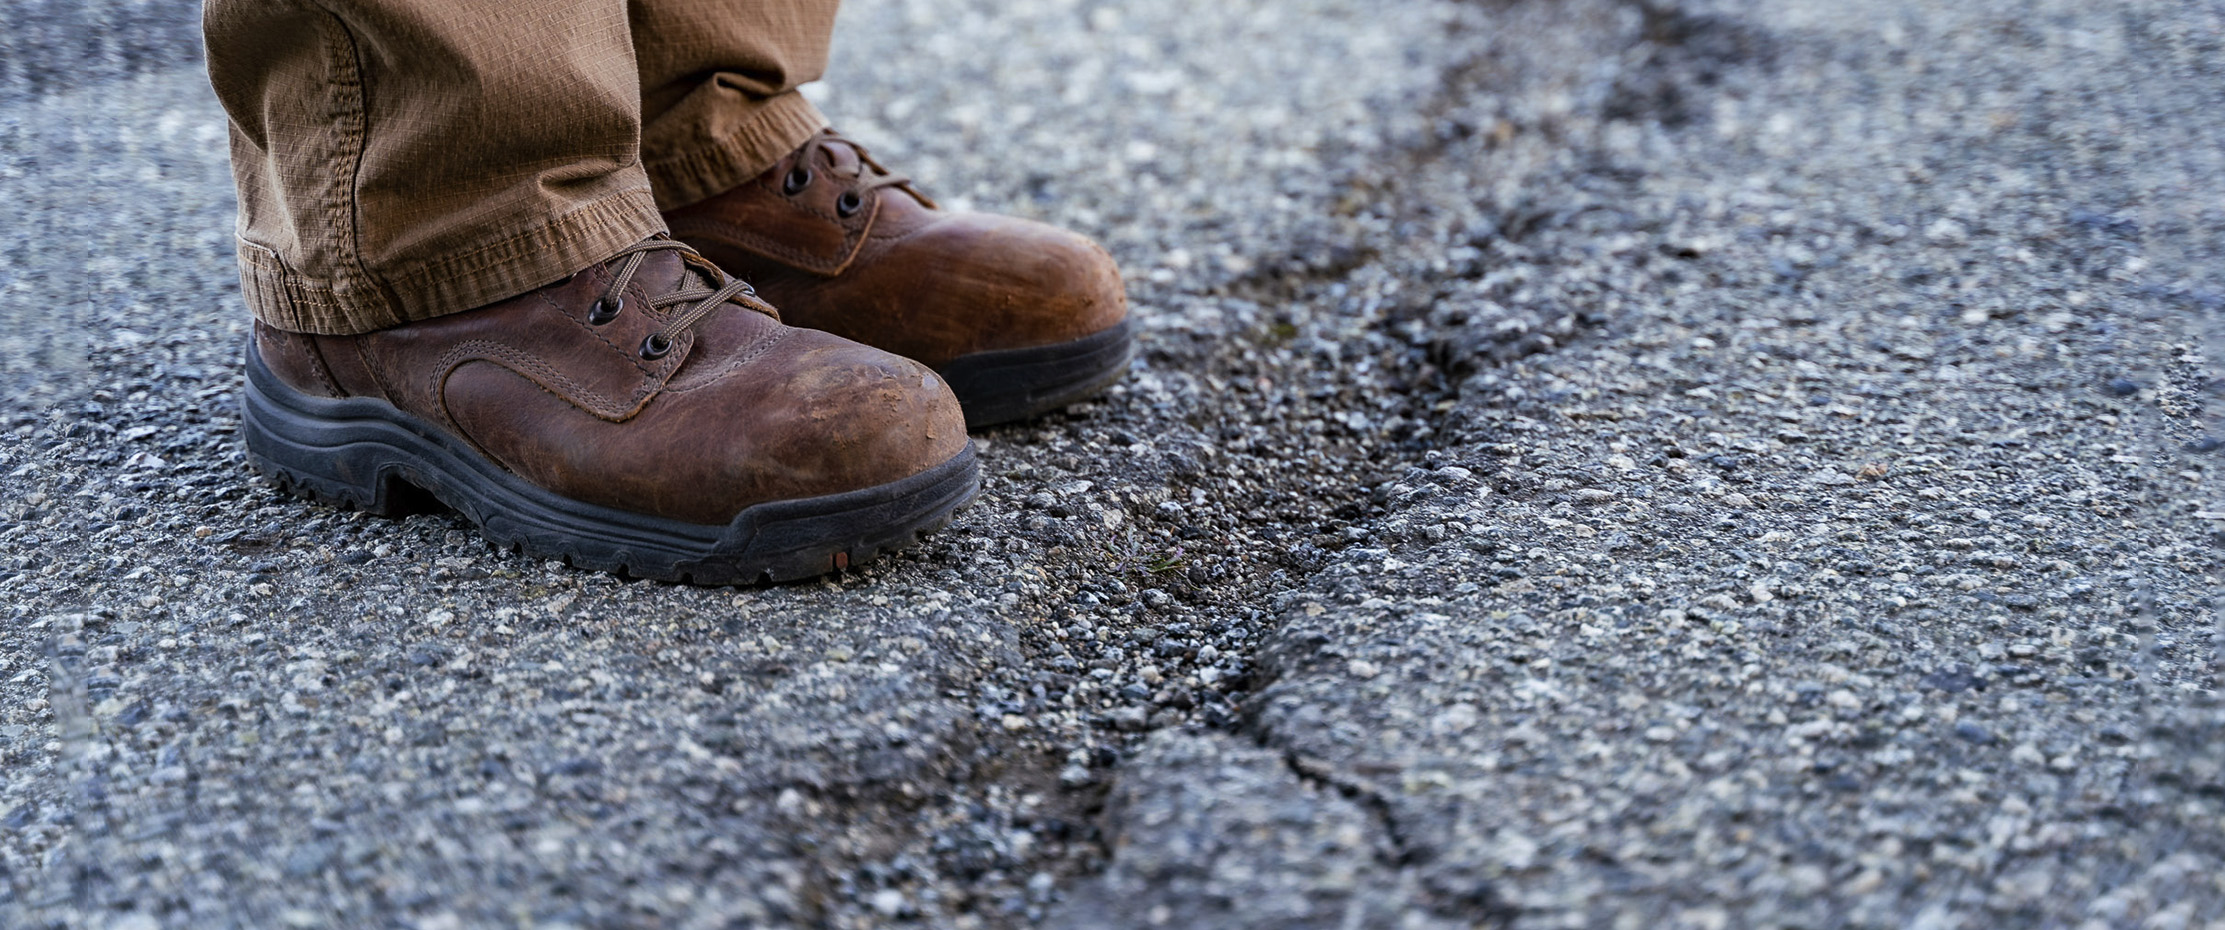 A pair of scientist’s boots standing on the edge of a jagged crack in a road